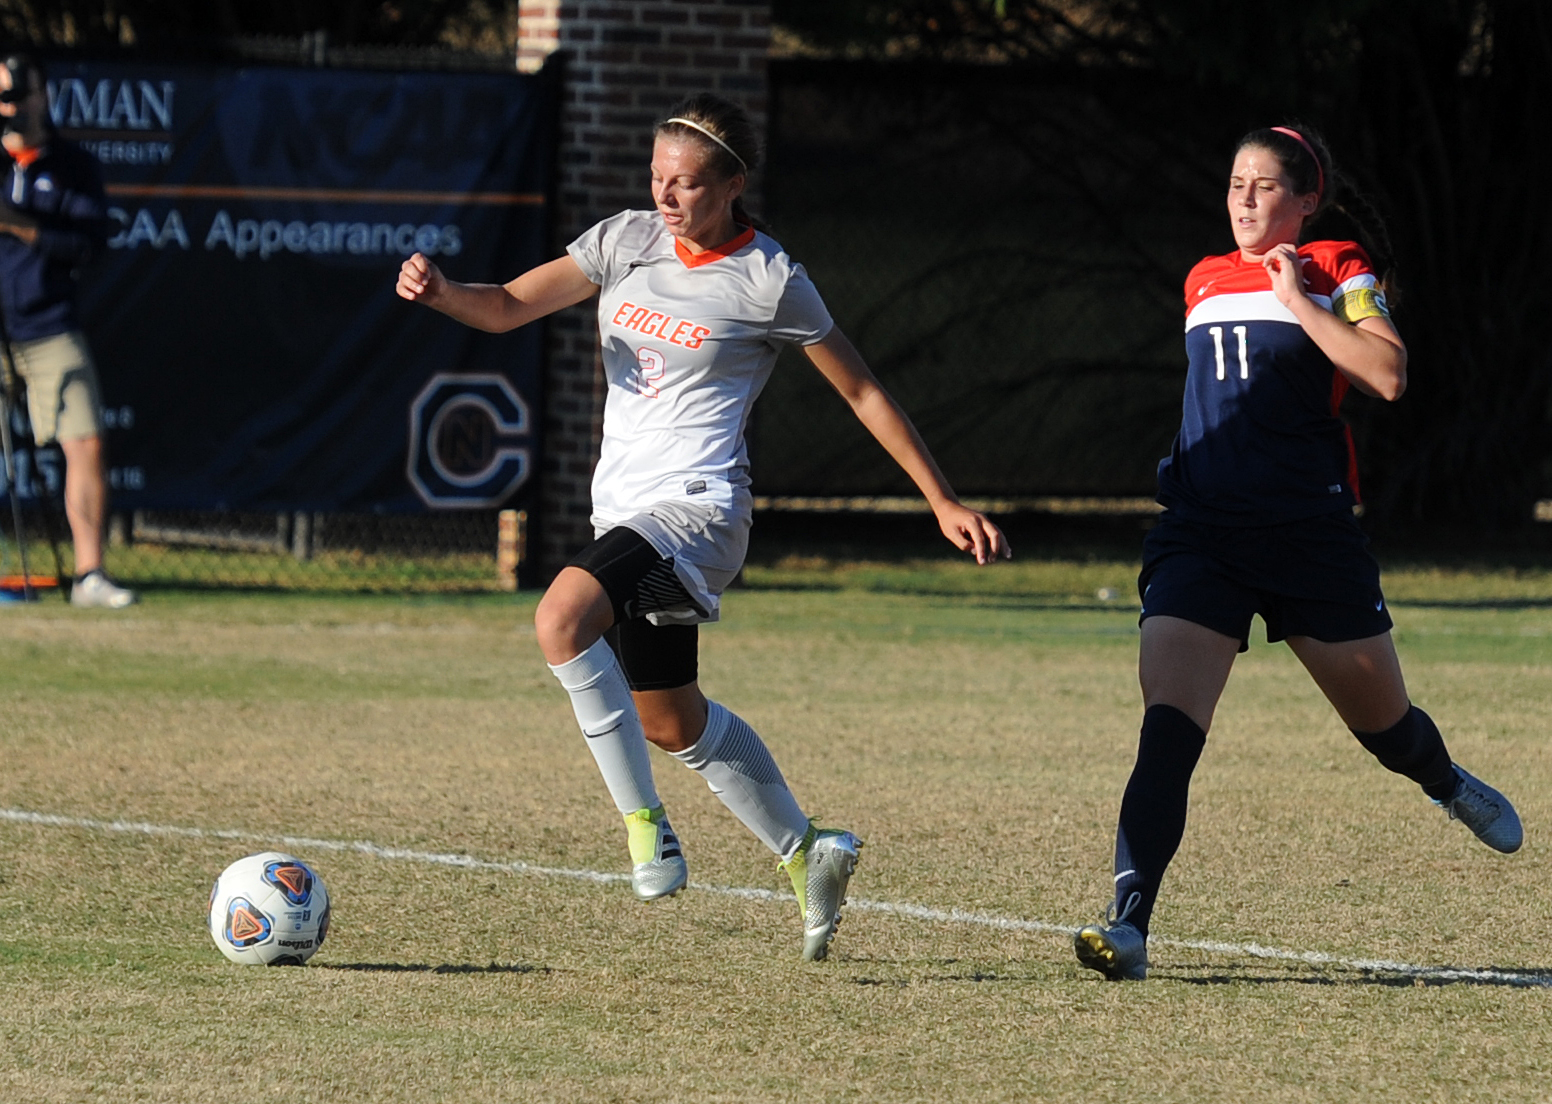 Talbut-Smith's three points help Eagles roll past King, 3-0